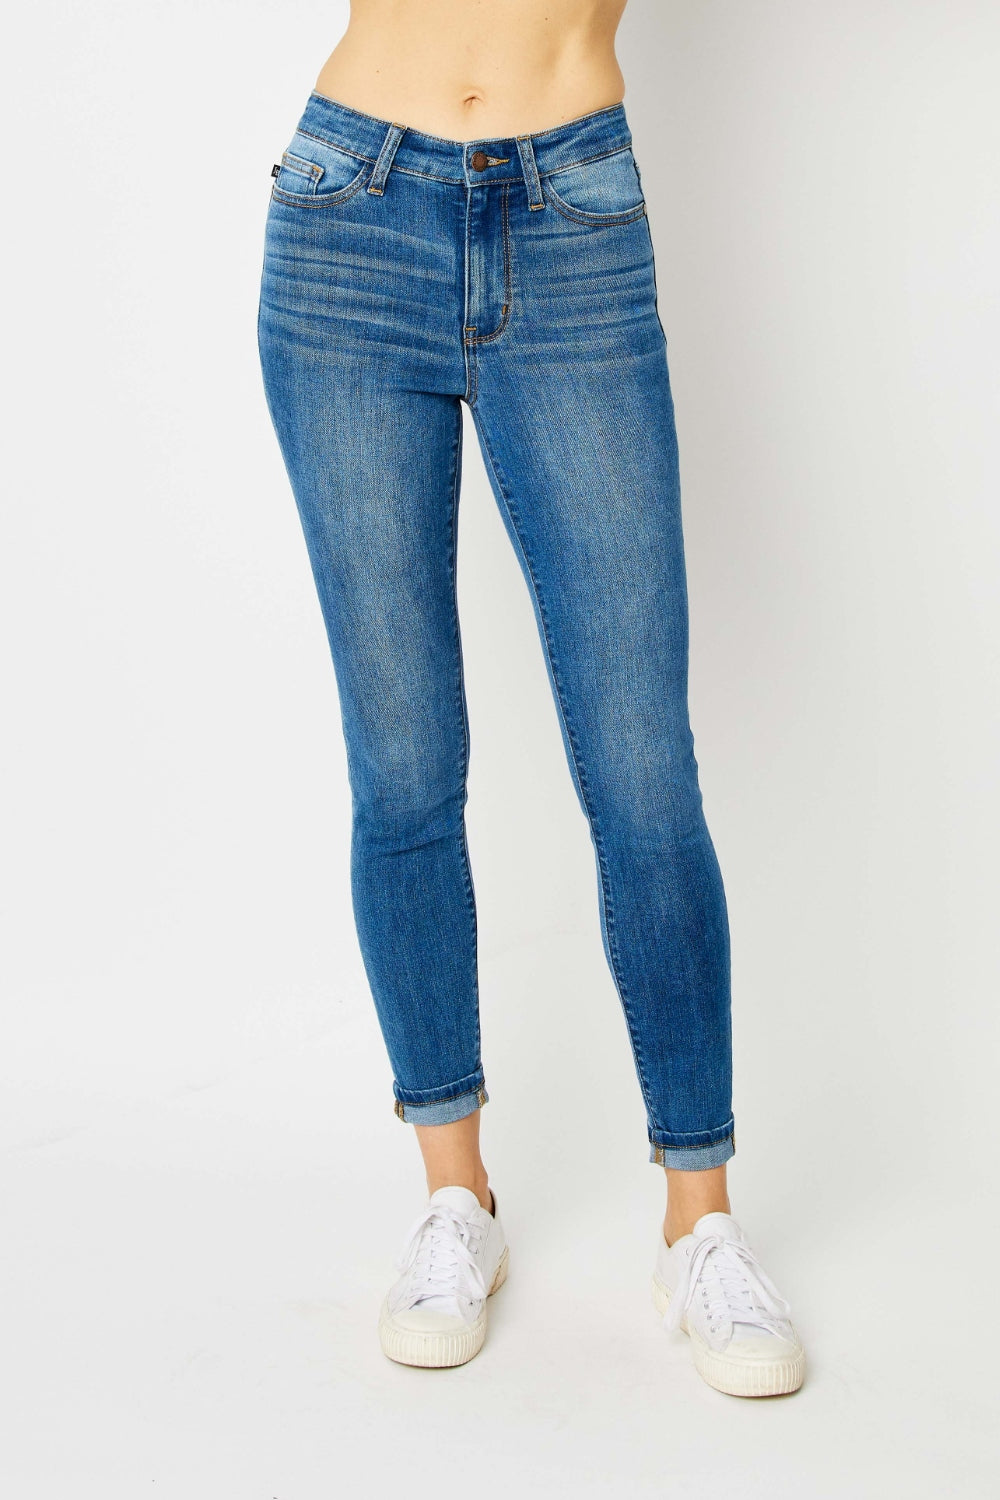 Judy Blue Full Size Cuffed Hem Skinny Jeans-Denim-Inspired by Justeen-Women's Clothing Boutique in Chicago, Illinois